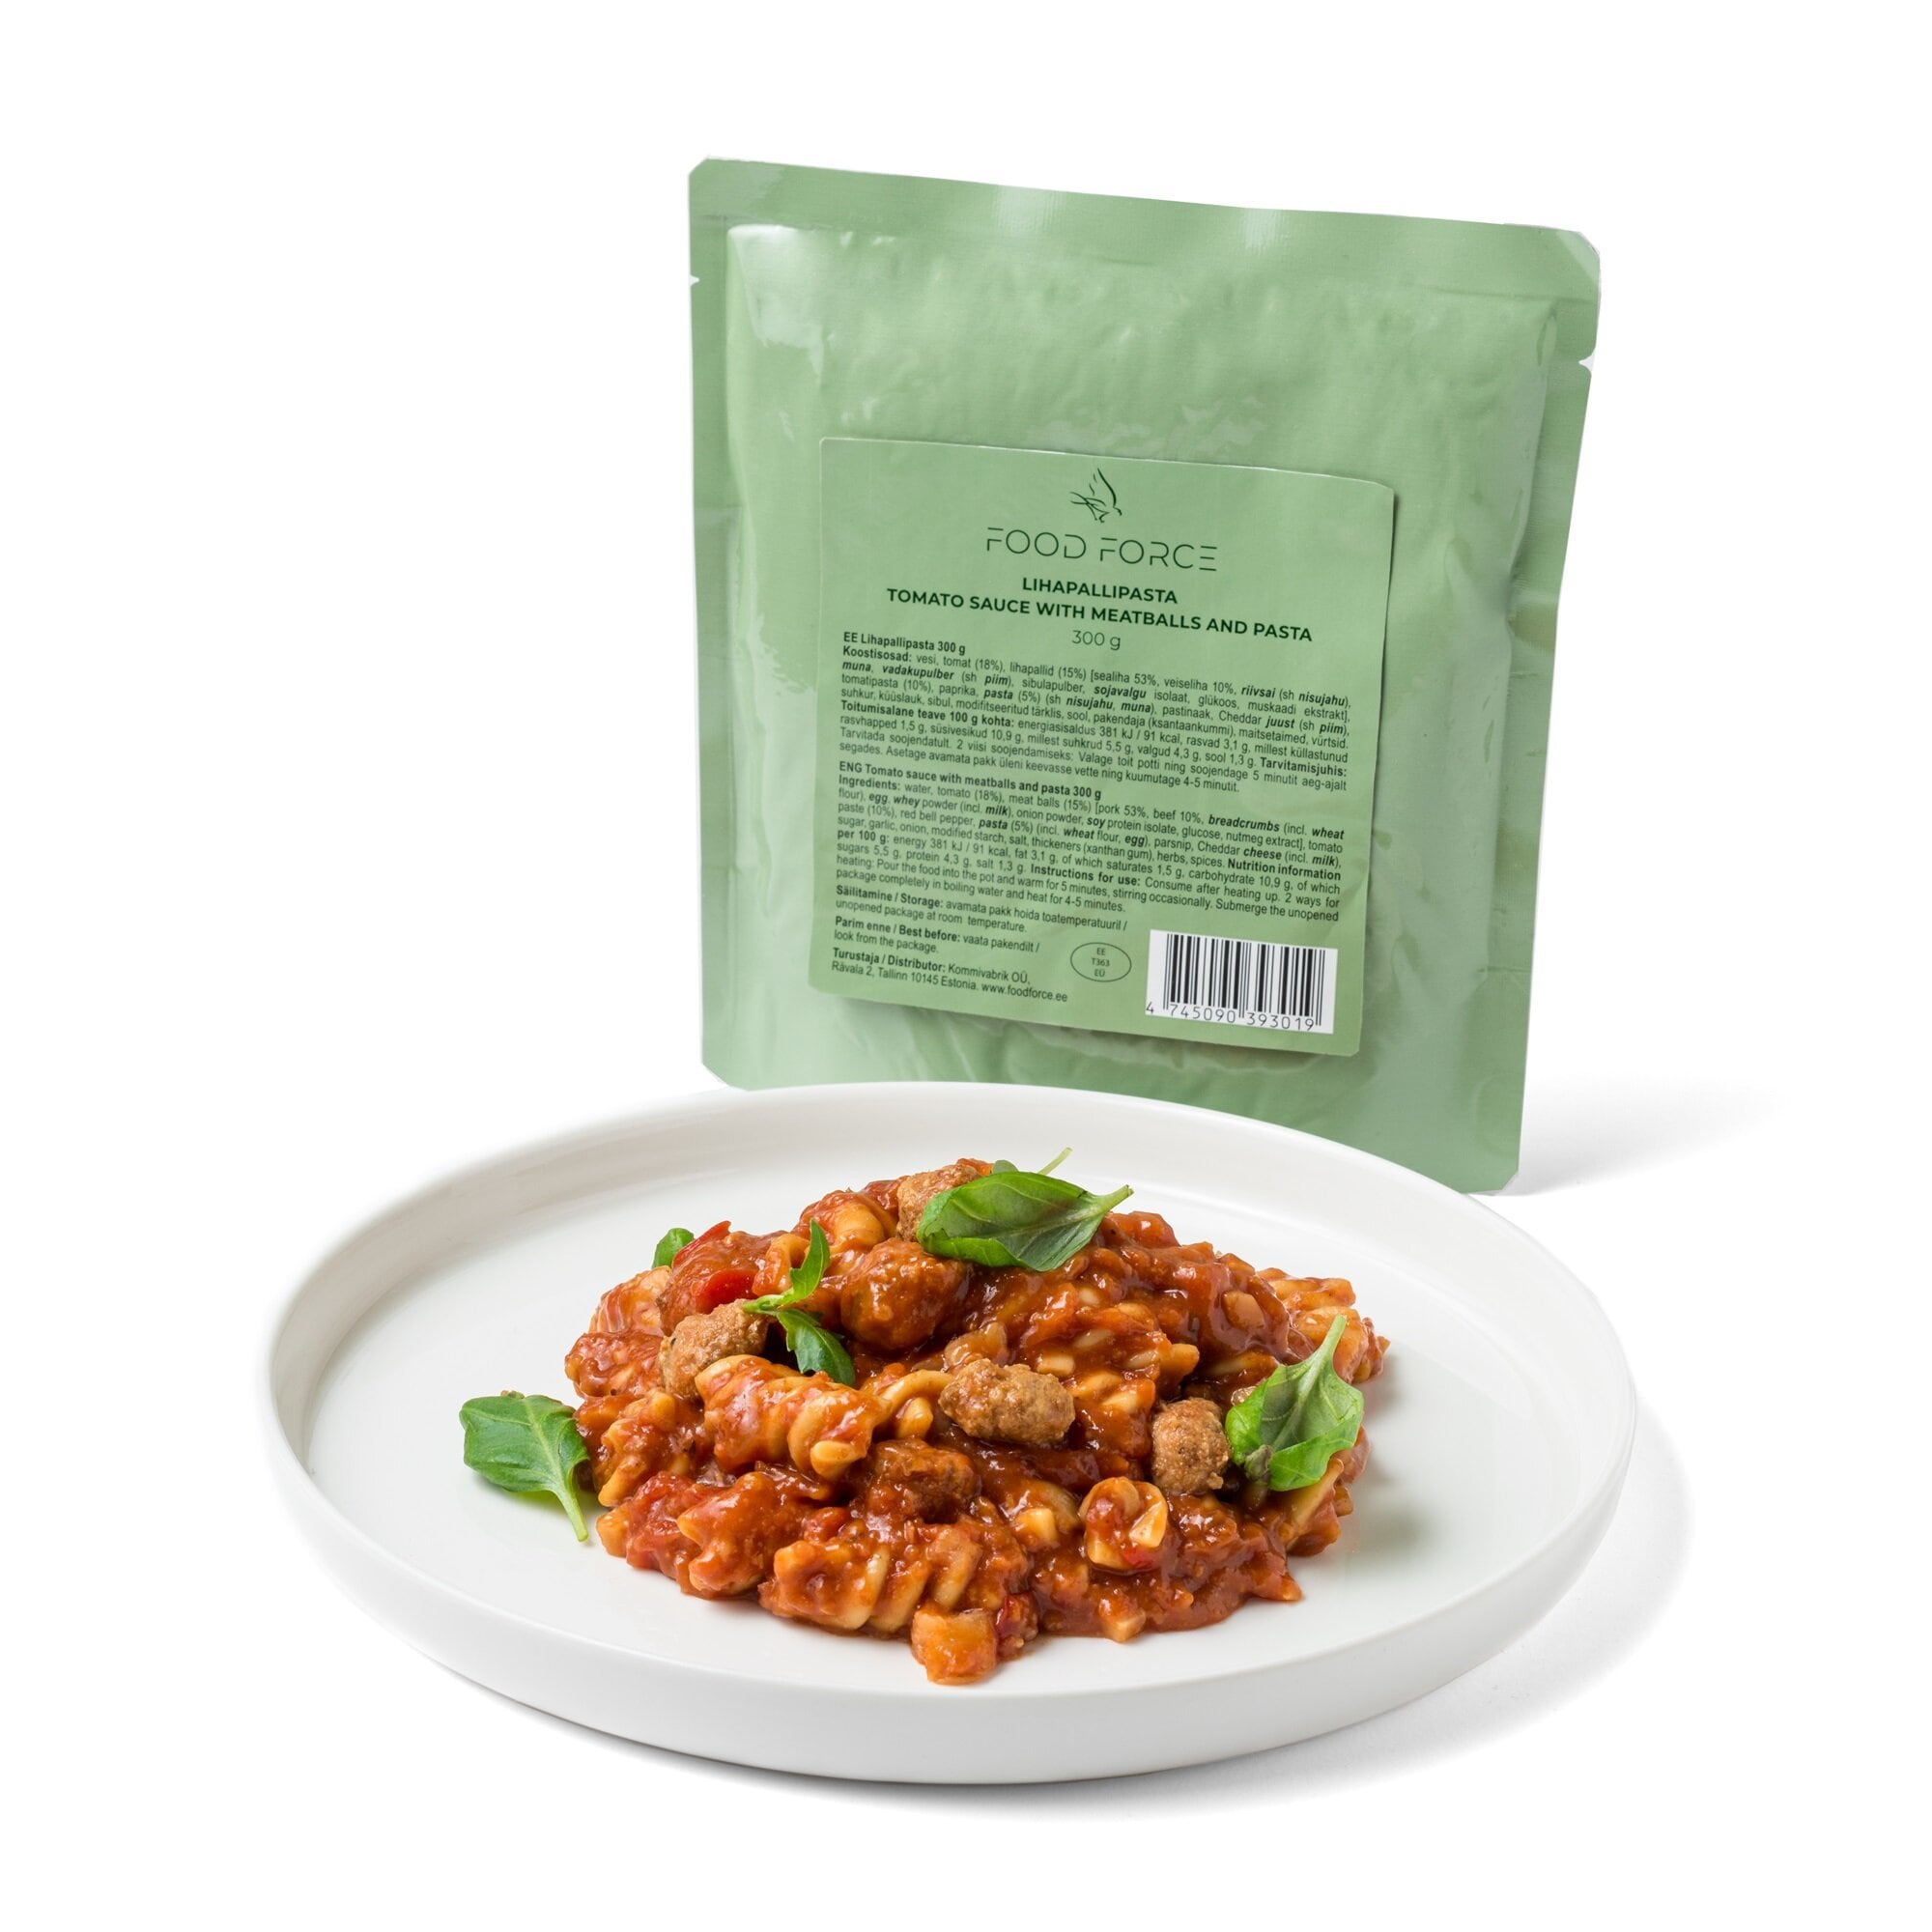 Food Force Tomato sauce with meatballs and pasta - Wet Pouch